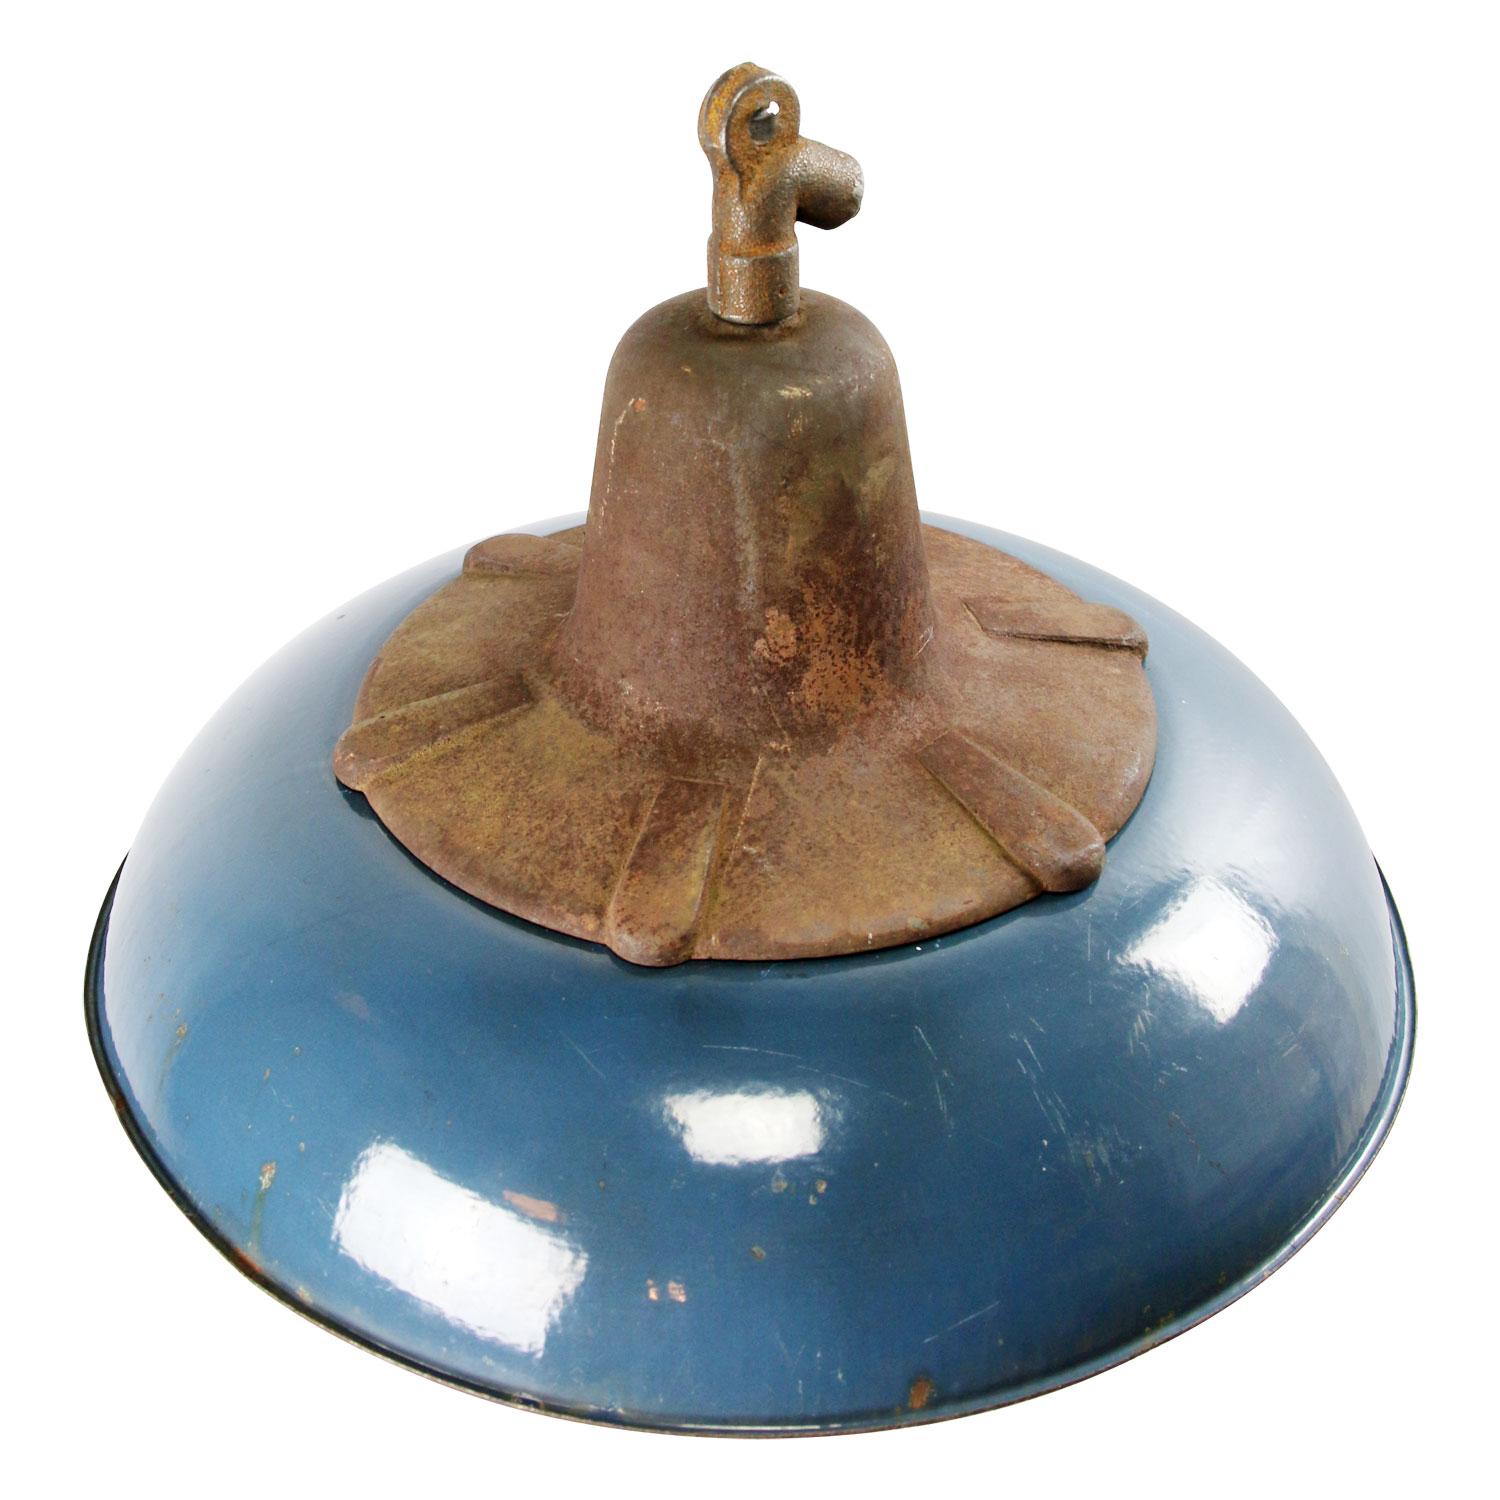 Factory pendant. Blue enamel white interior. Cast iron top.
Holophane glass.

Weight: 9.0 kg / 19.8 lb

All lamps have been made suitable by international standards for incandescent light bulbs, energy-efficient and LED bulbs. E26/E27 bulb